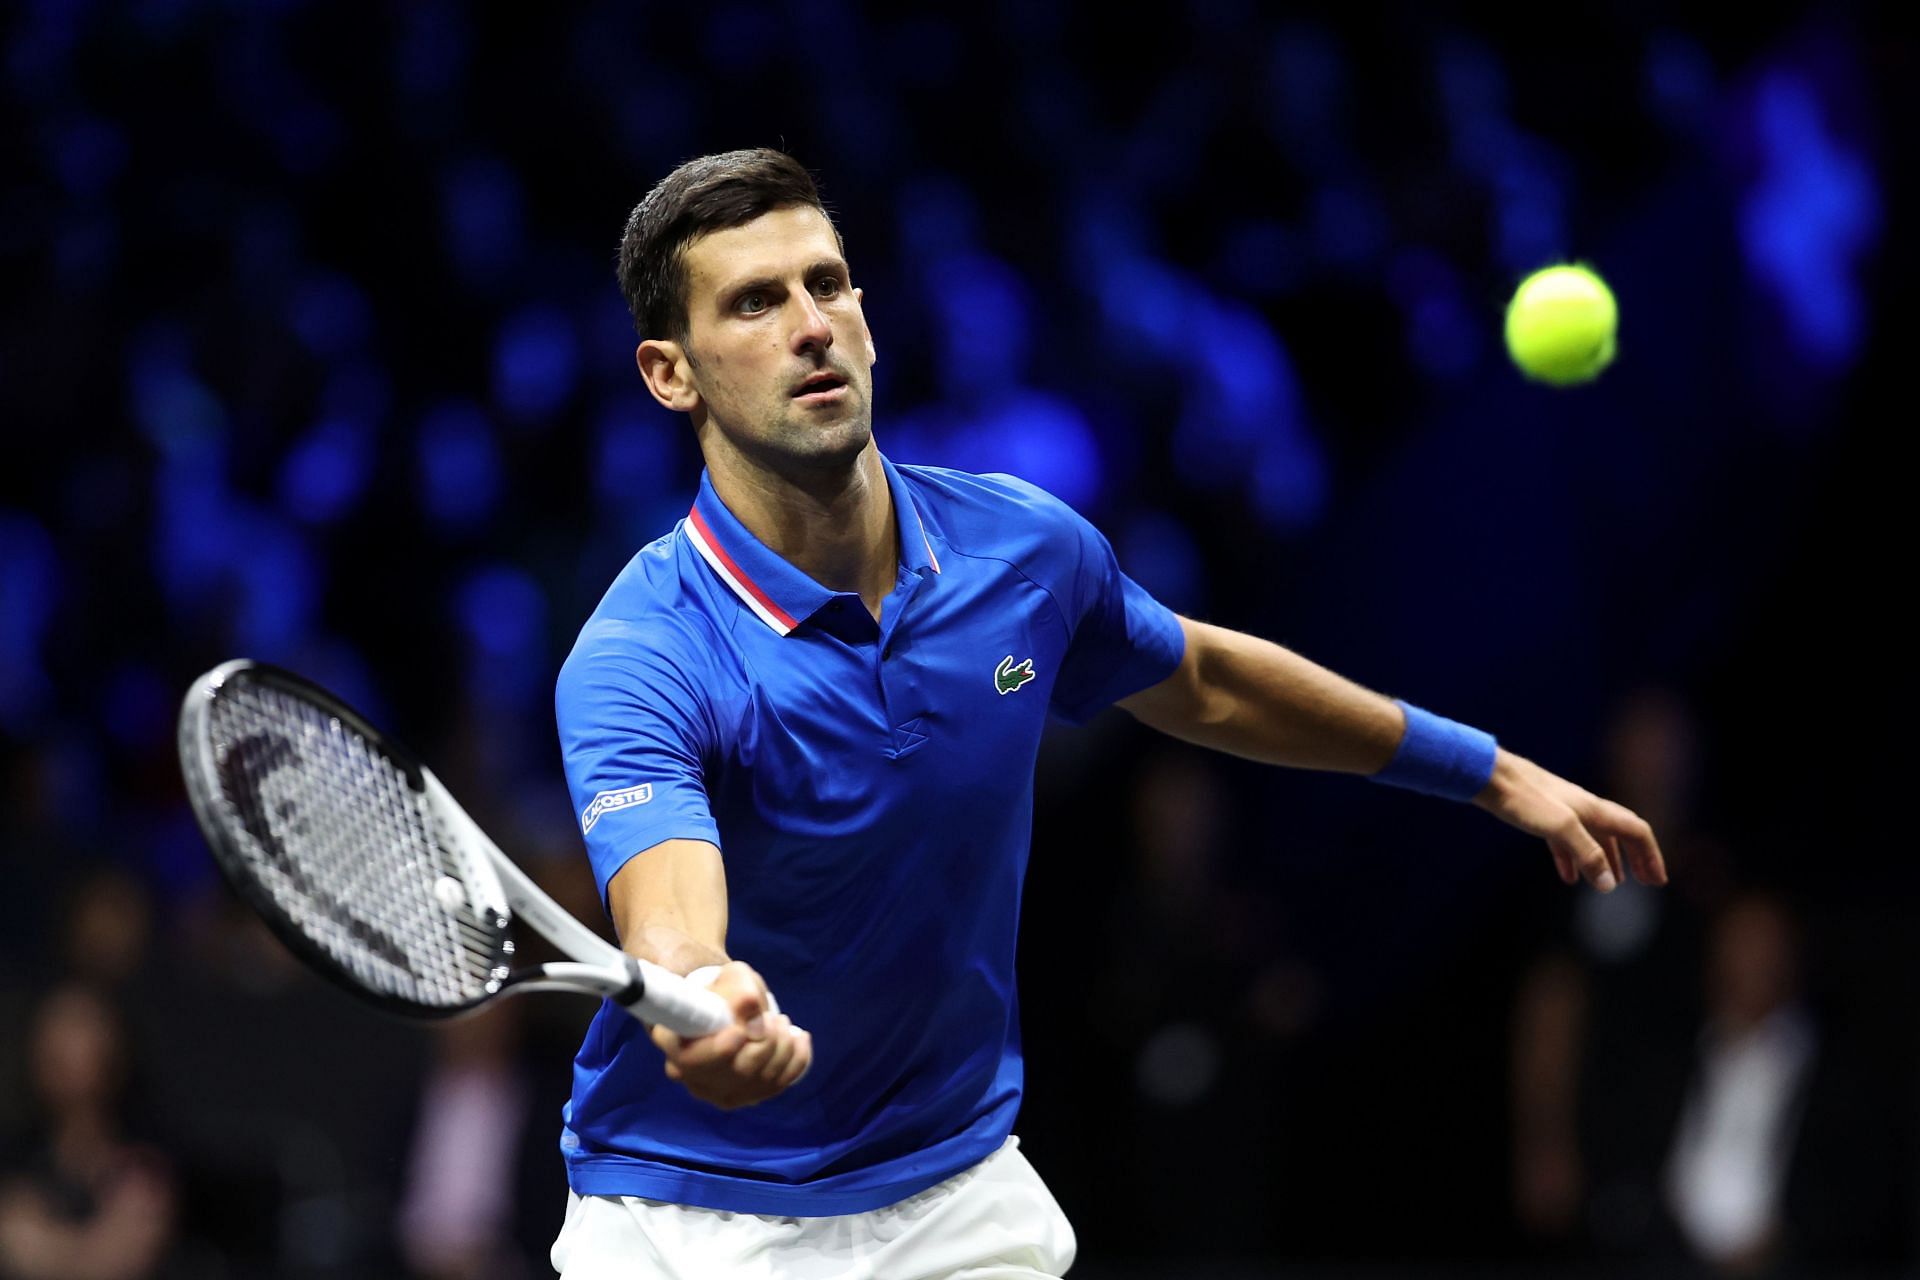 Novak Djokovic at the 2022 Laver Cup. (PC: Getty Images)